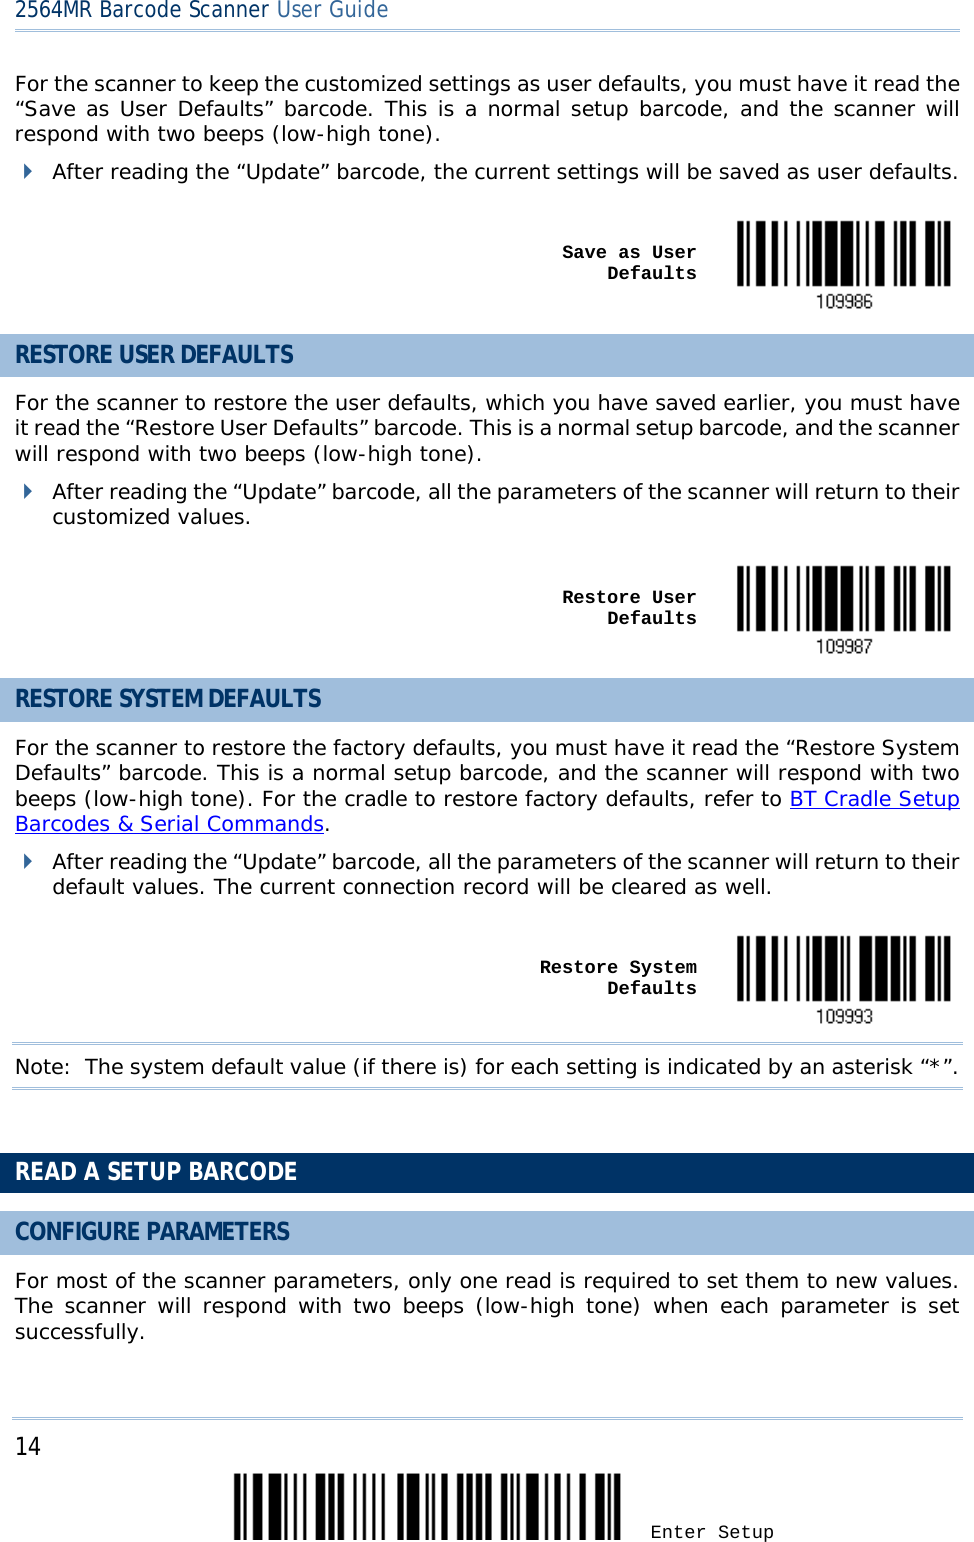 2564MR Barcode Scanner User Guide  For the scanner to keep the customized settings as user defaults, you must have it read the “Save as User Defaults” barcode. This is a normal setup barcode, and the scanner will respond with two beeps (low-high tone).  After reading the “Update” barcode, the current settings will be saved as user defaults.     Save as User  Defaults  RESTORE USER DEFAULTS For the scanner to restore the user defaults, which you have saved earlier, you must have it read the “Restore User Defaults” barcode. This is a normal setup barcode, and the scanner will respond with two beeps (low-high tone).  After reading the “Update” barcode, all the parameters of the scanner will return to their customized values.      Restore User Defaults  RESTORE SYSTEM DEFAULTS For the scanner to restore the factory defaults, you must have it read the “Restore System Defaults” barcode. This is a normal setup barcode, and the scanner will respond with two beeps (low-high tone). For the cradle to restore factory defaults, refer to BT Cradle Setup Barcodes &amp; Serial Commands.  After reading the “Update” barcode, all the parameters of the scanner will return to their default values. The current connection record will be cleared as well.     Restore System Defaults  Note: The system default value (if there is) for each setting is indicated by an asterisk “*”.   READ A SETUP BARCODE CONFIGURE PARAMETERS For most of the scanner parameters, only one read is required to set them to new values. The scanner will respond with two beeps (low-high tone) when each parameter is set successfully.  14 Enter Setup 